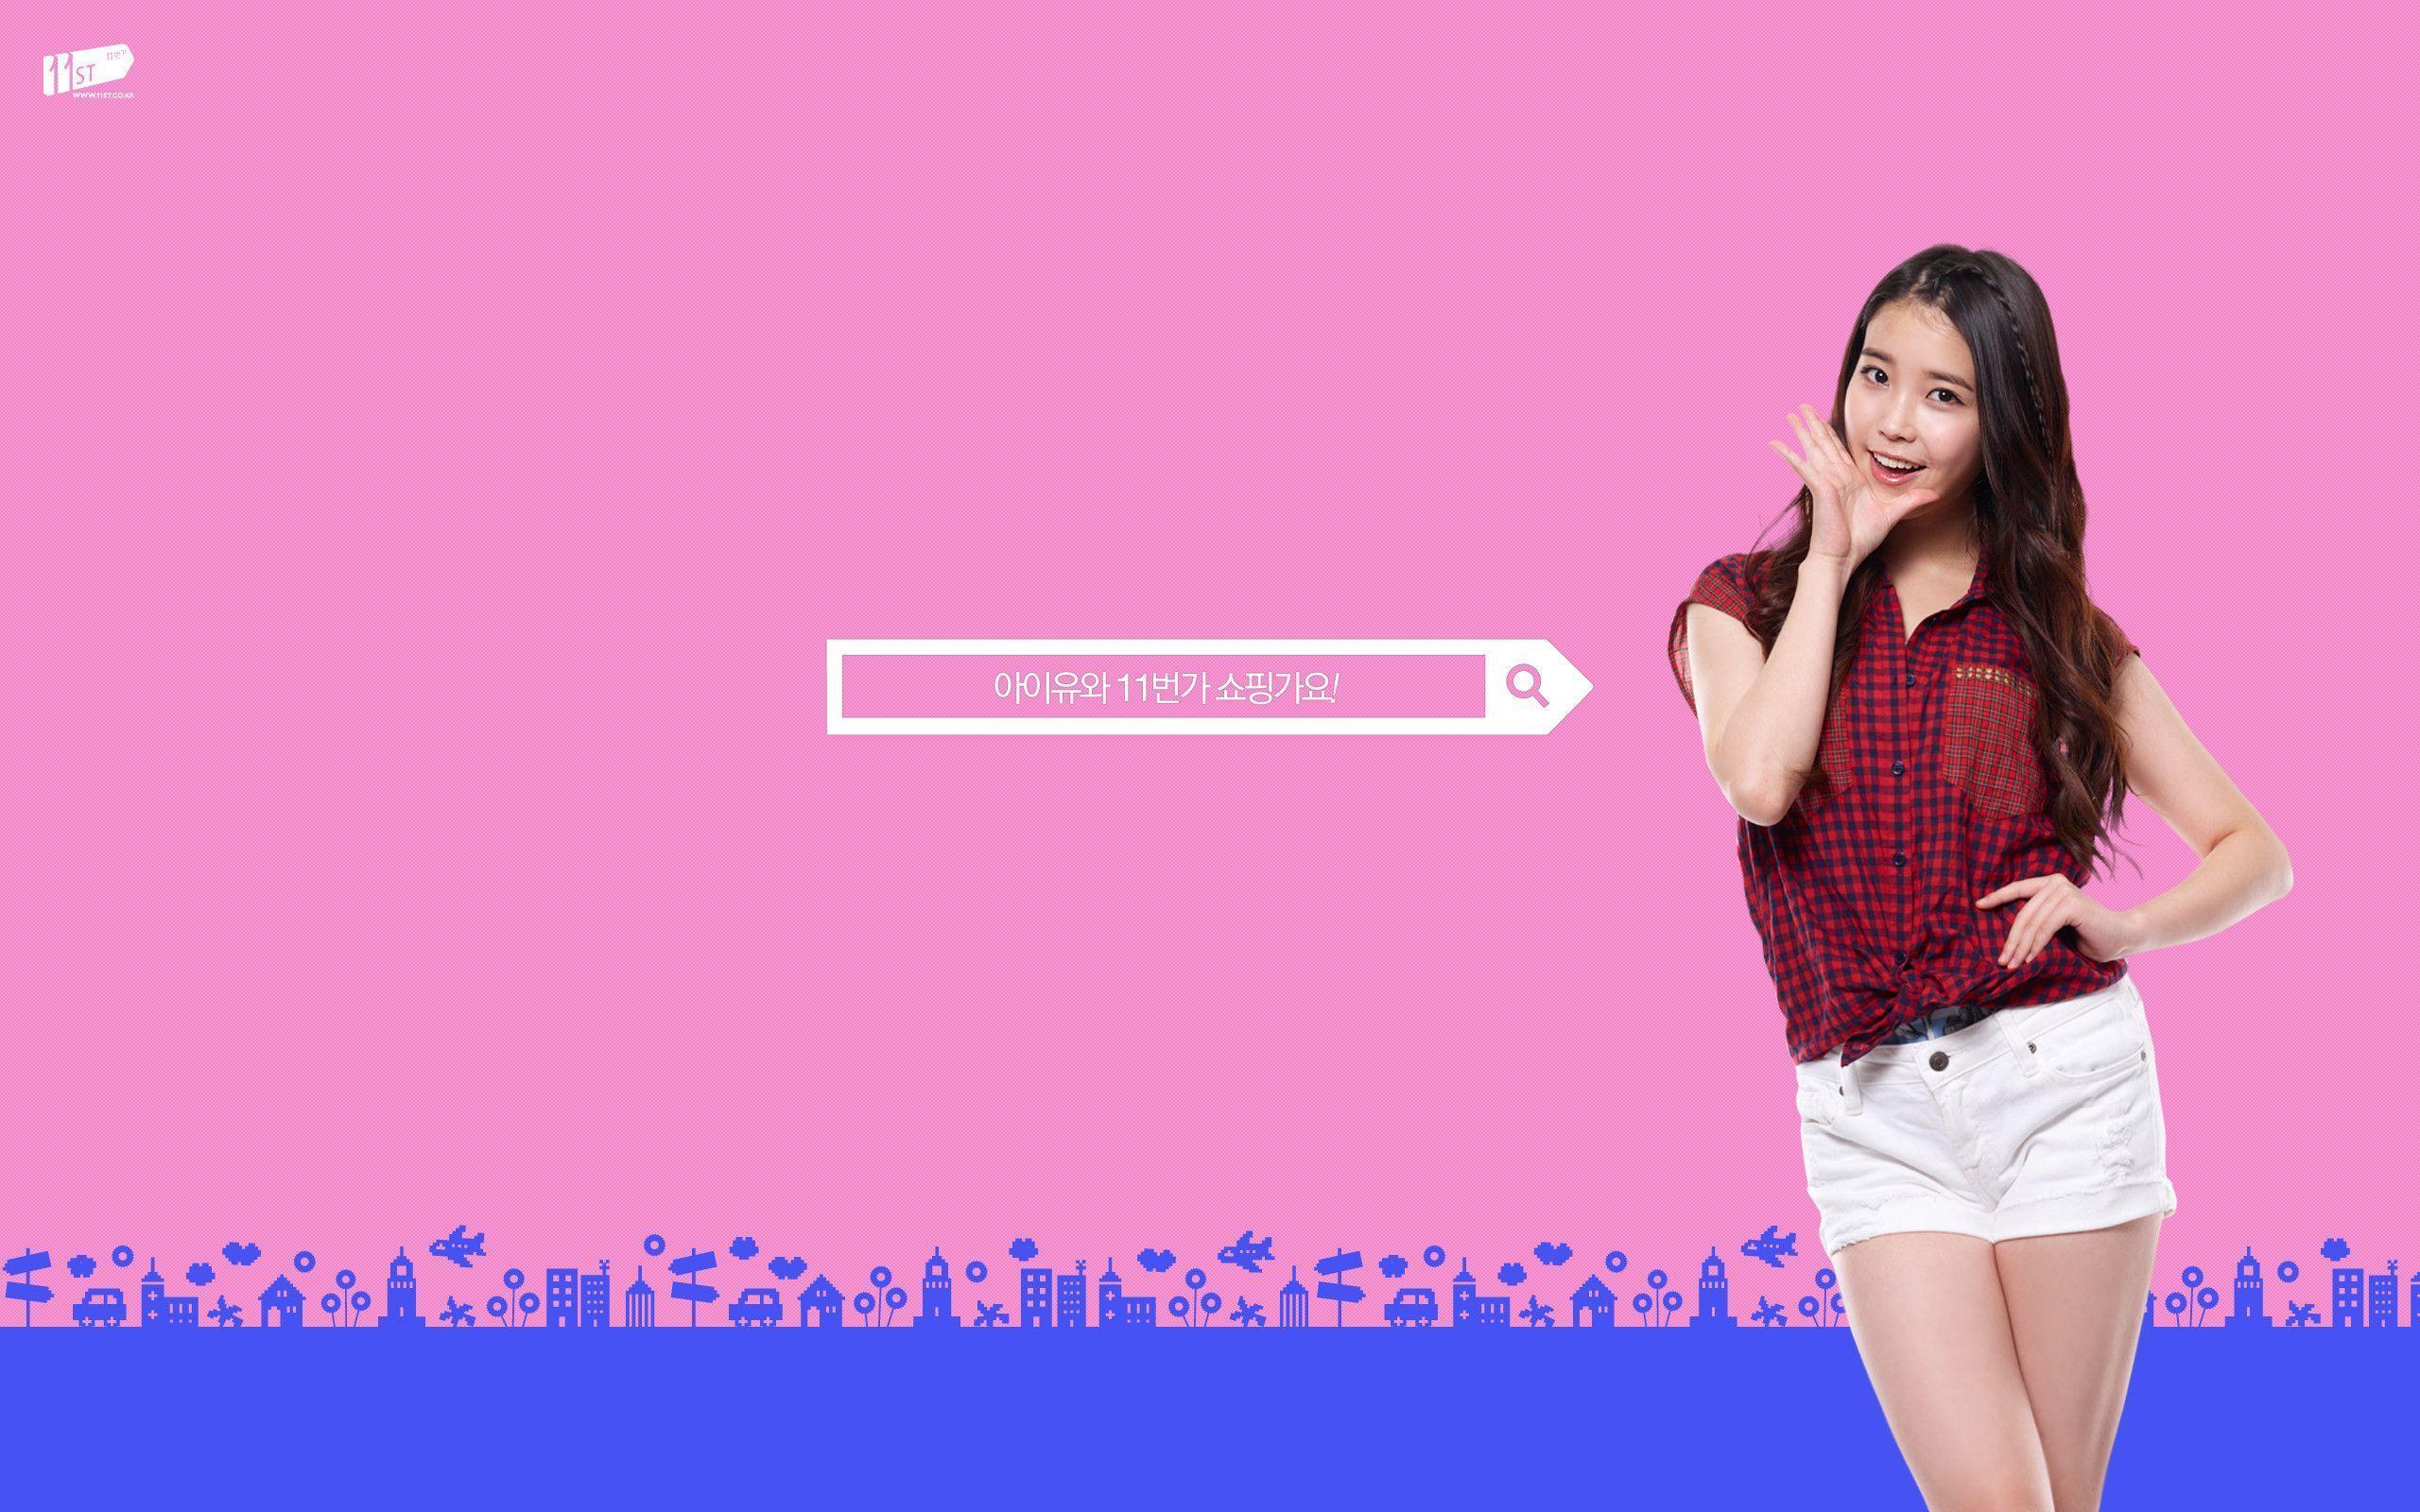 11ST Online Shopping Mall Wallpaper and Webcaps